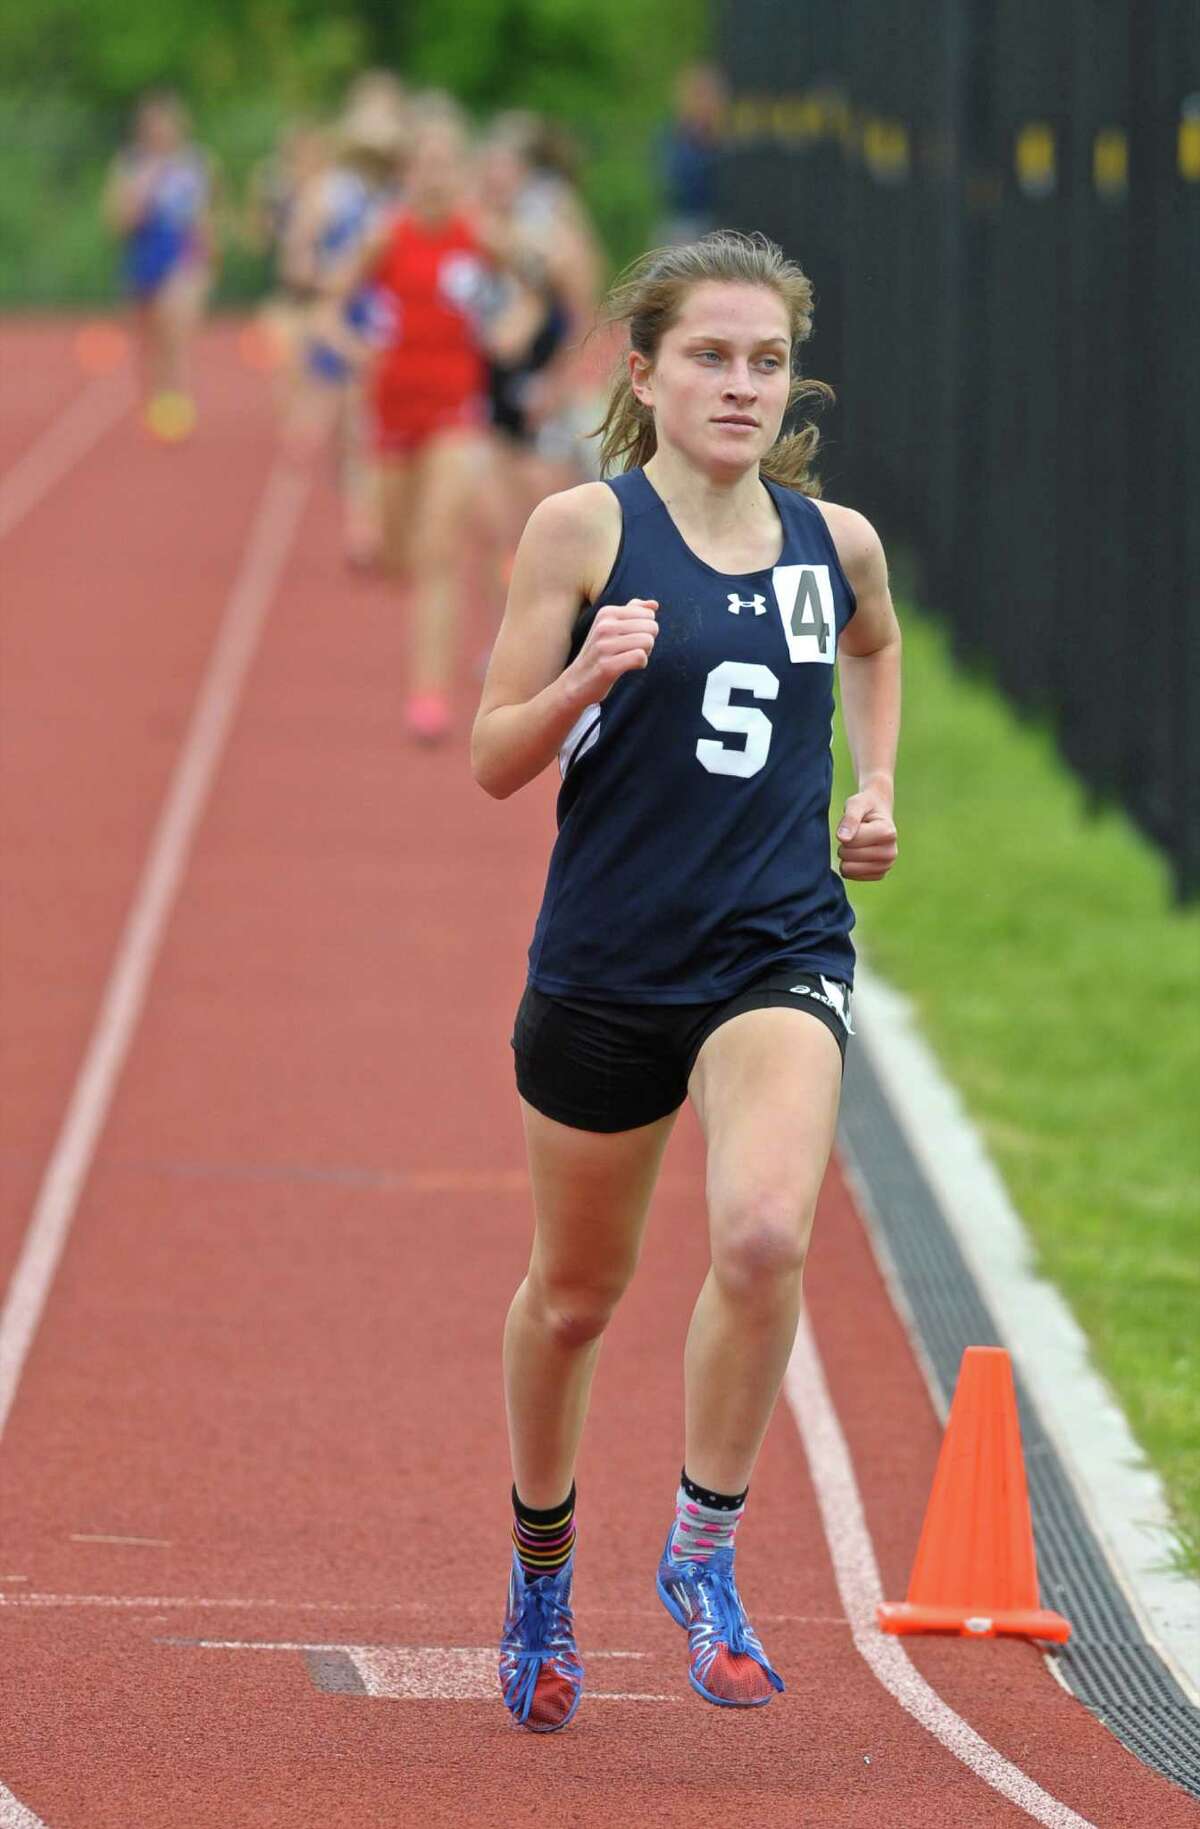 Staple's Hannah DeBalsi competes in the 1600 meter run at the FCIAC girls track championships, held at Bethel High School, Saturday, May 21, 2016, in Bethel, Conn.